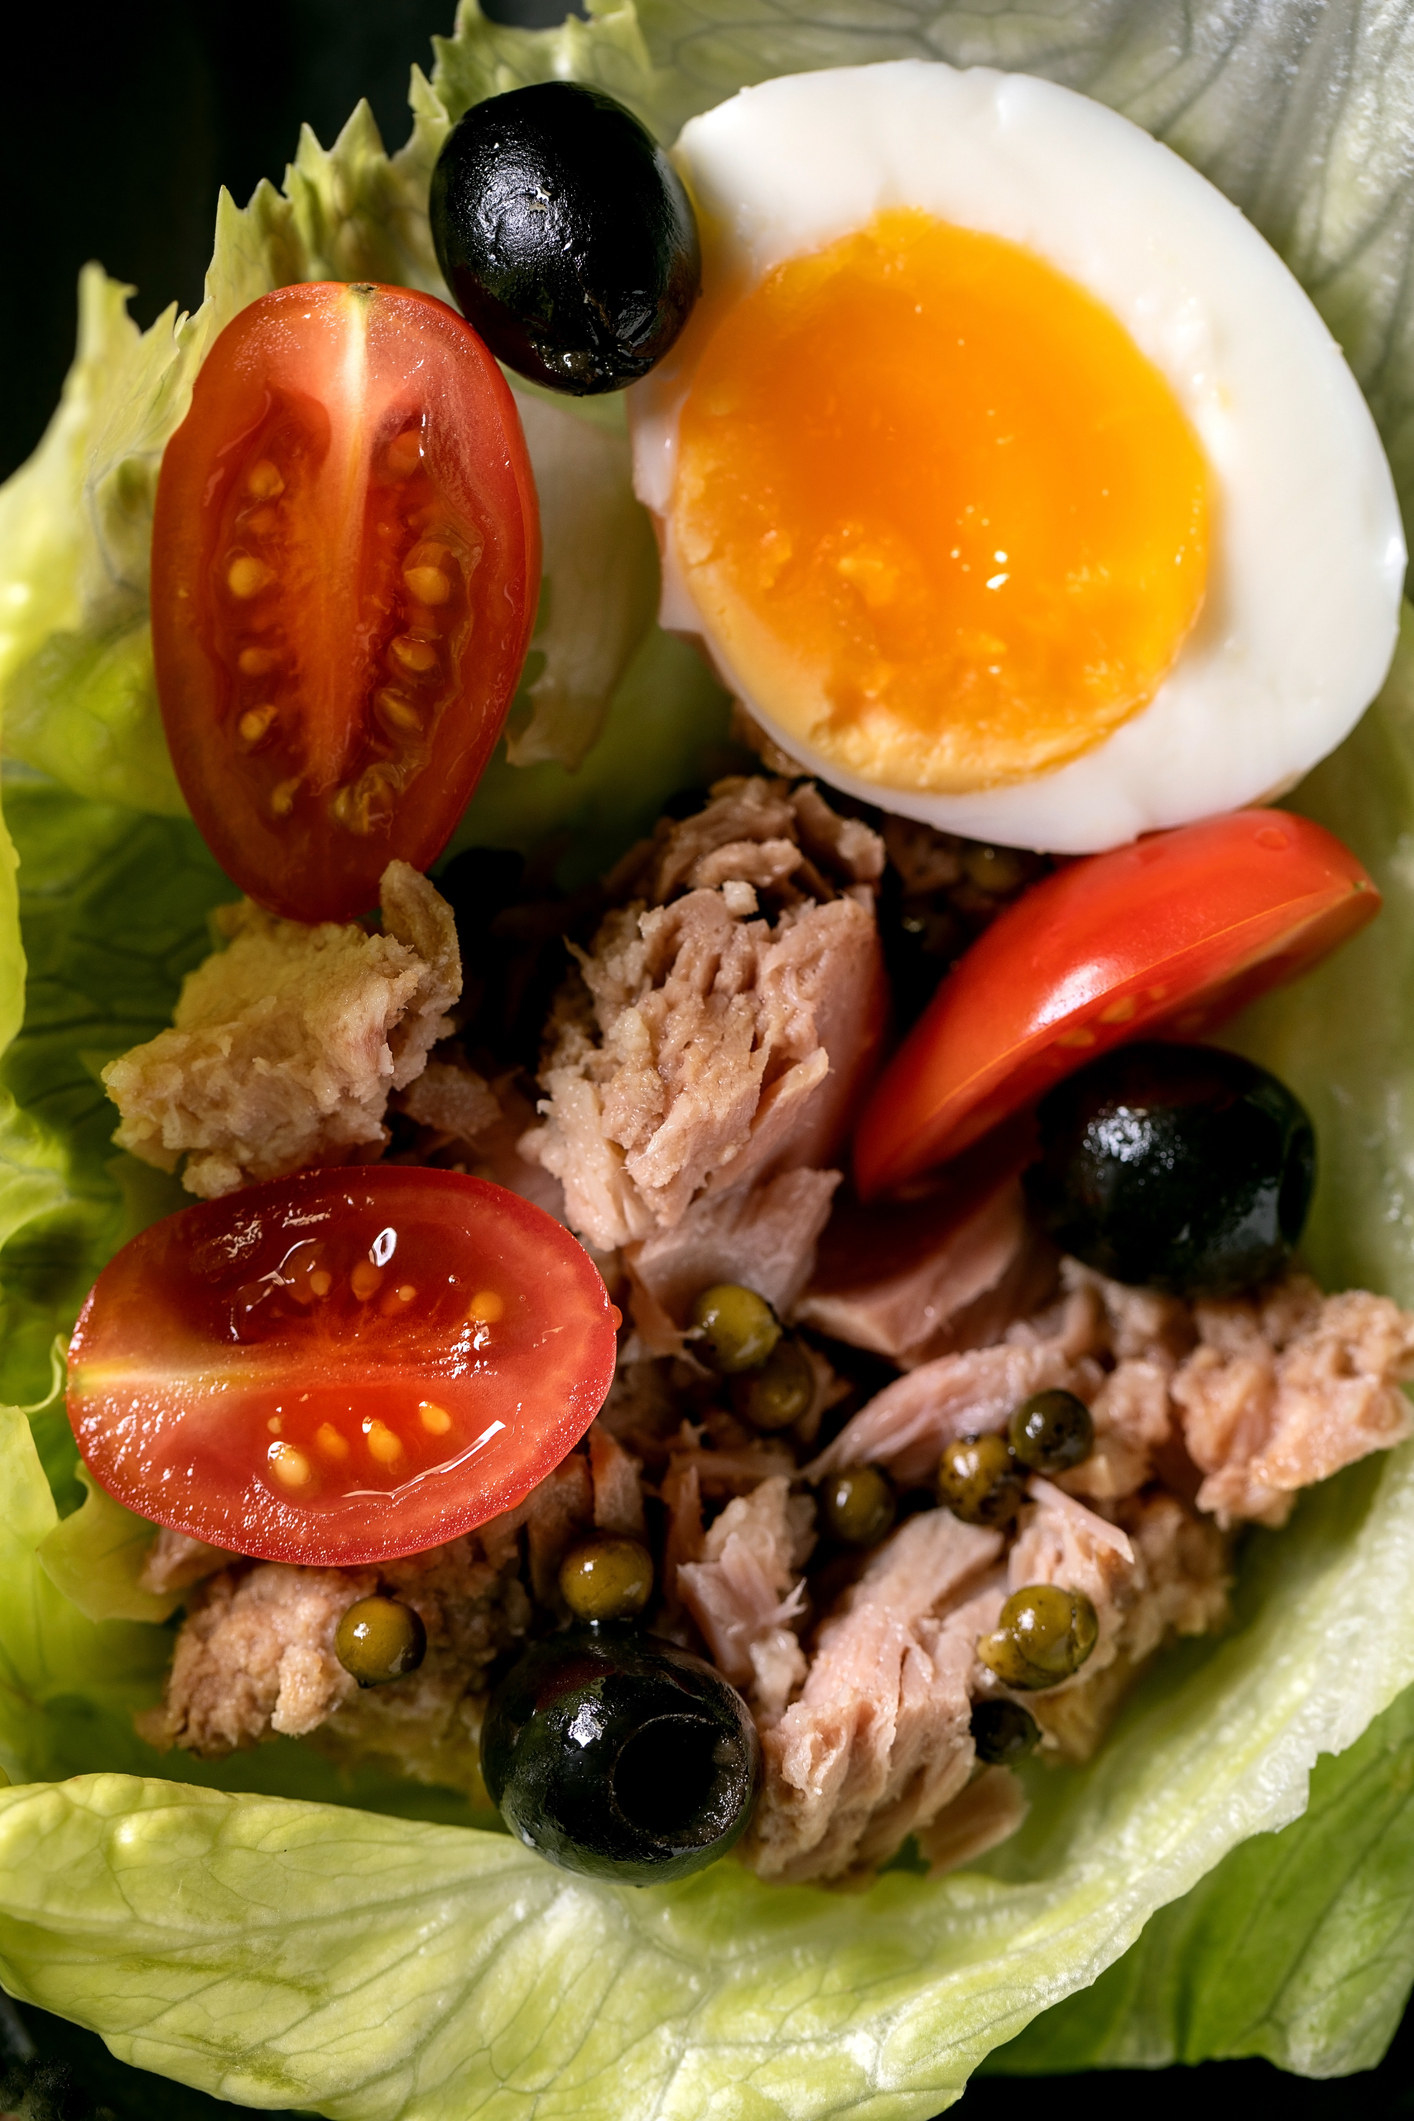 Traditional salade Niçoise with canned tuna fish